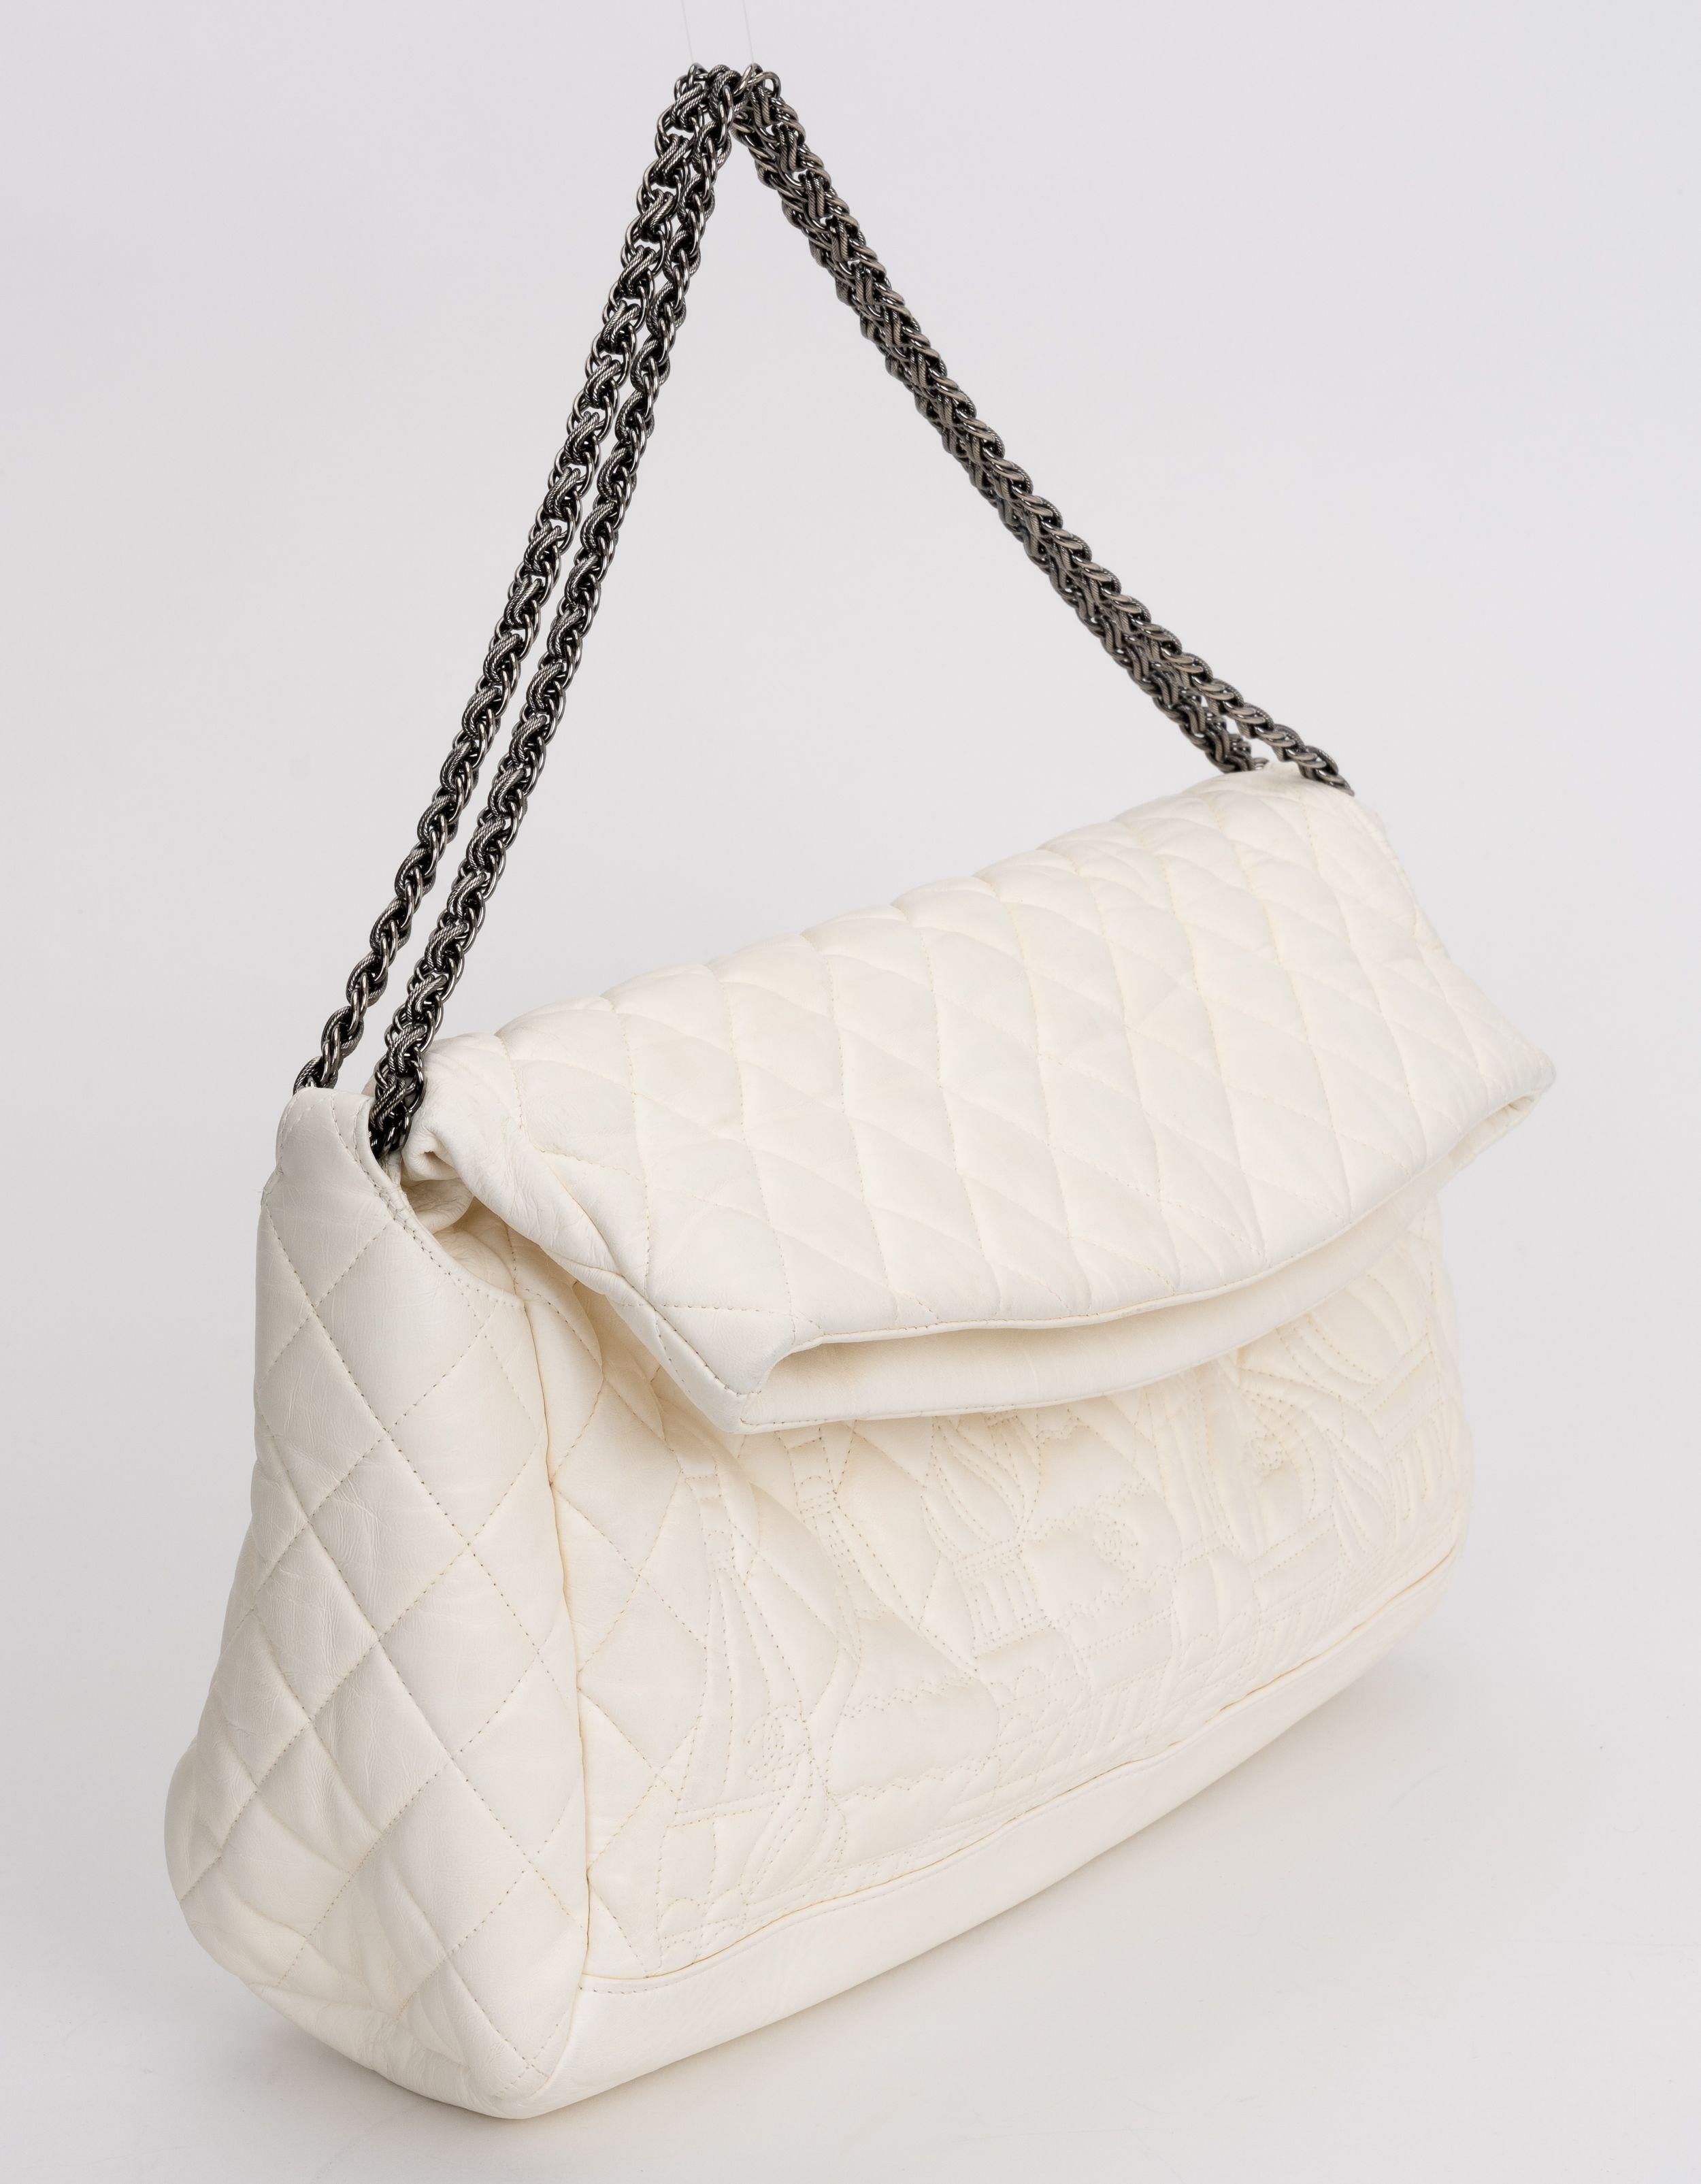 Chanel Quilted Paris Moscou square bag in Ivory Lambskin, with diamond stitch. A silver chain top with a Chanel CC medallion. Top folds over too close. Mint condition. 
Shoulder drop 6.5